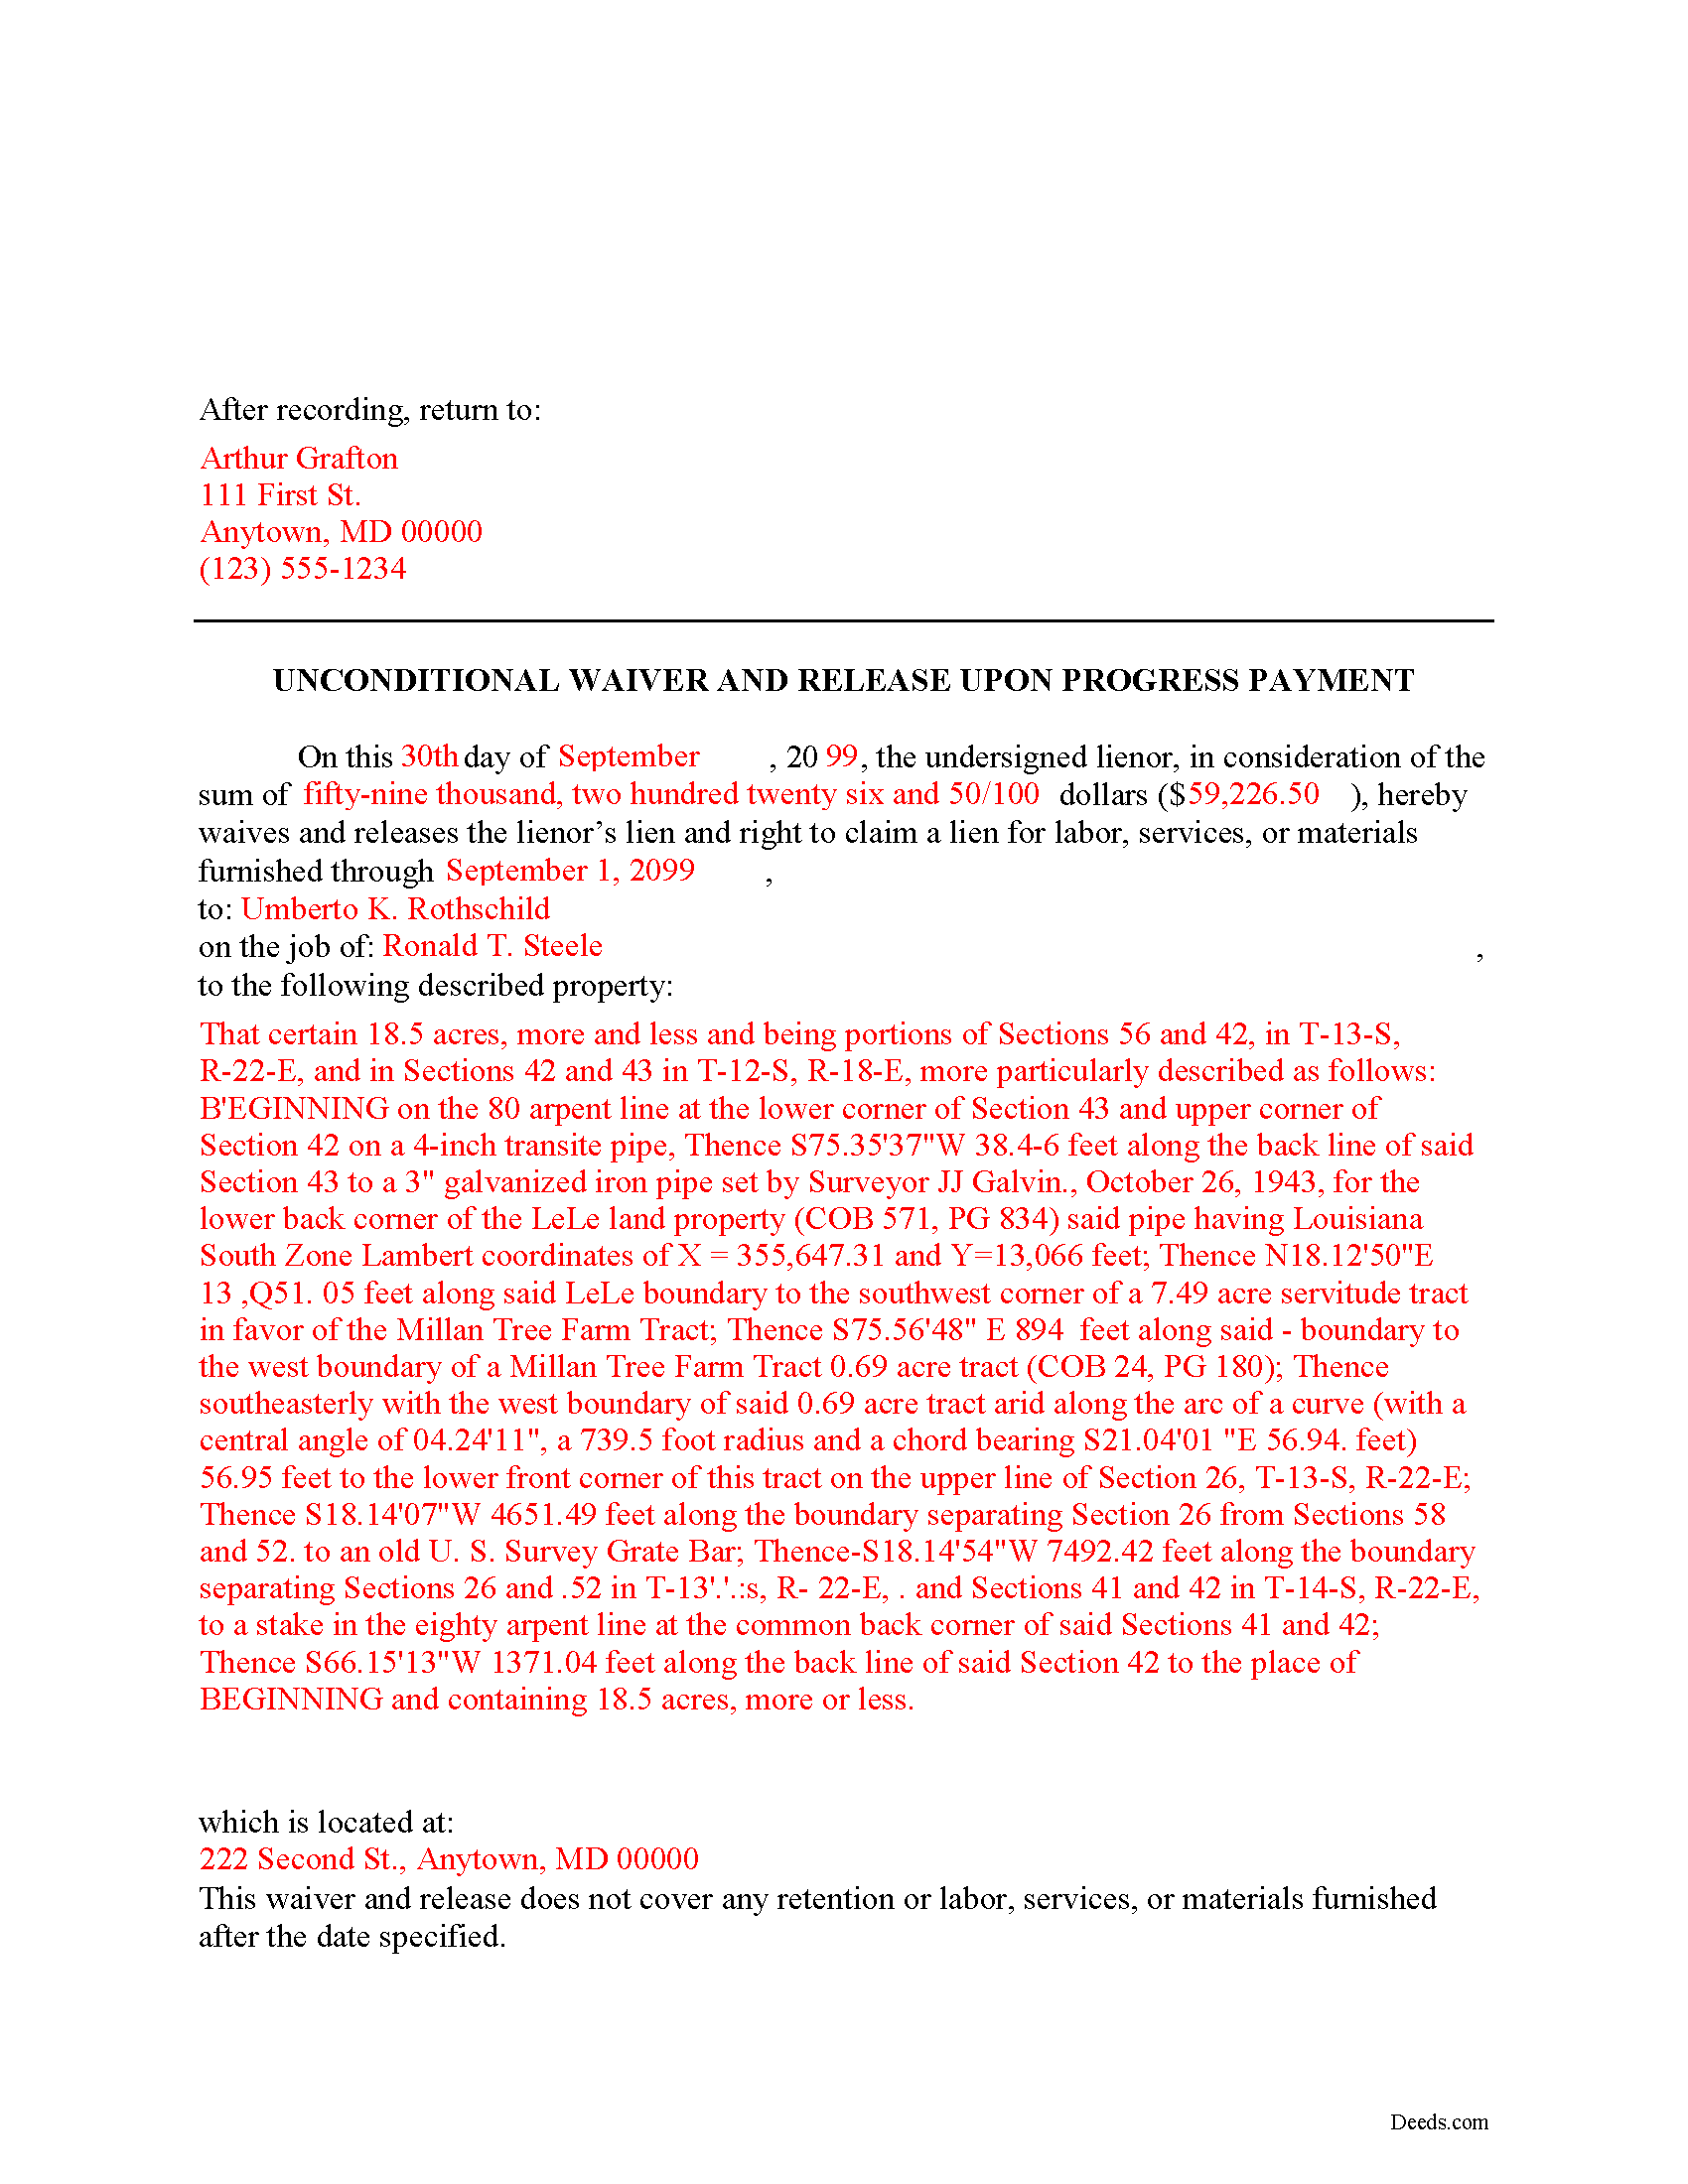 Completed Example of the Unconditional Lien Waiver on Progress Payment Document